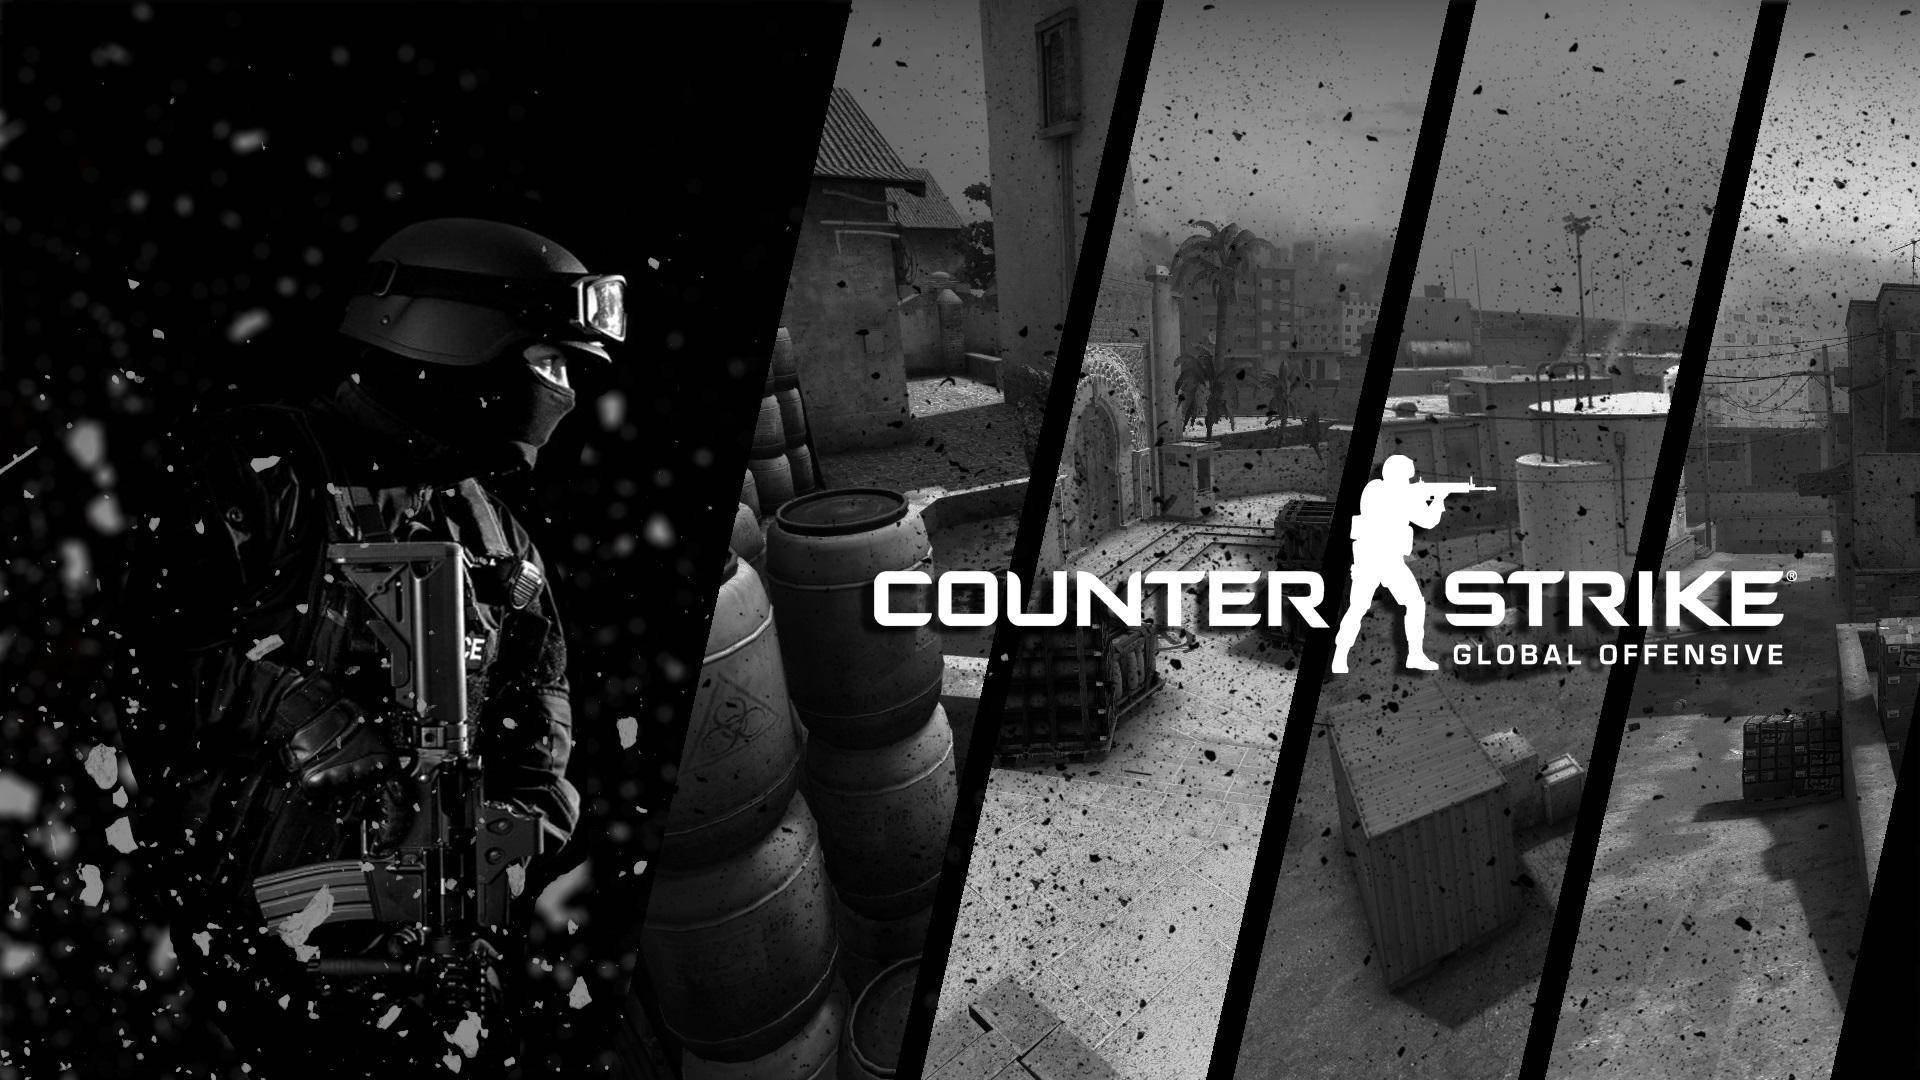 Free Counter Strike Global Offensive Wallpaper Downloads, [200+] Counter  Strike Global Offensive Wallpapers for FREE 